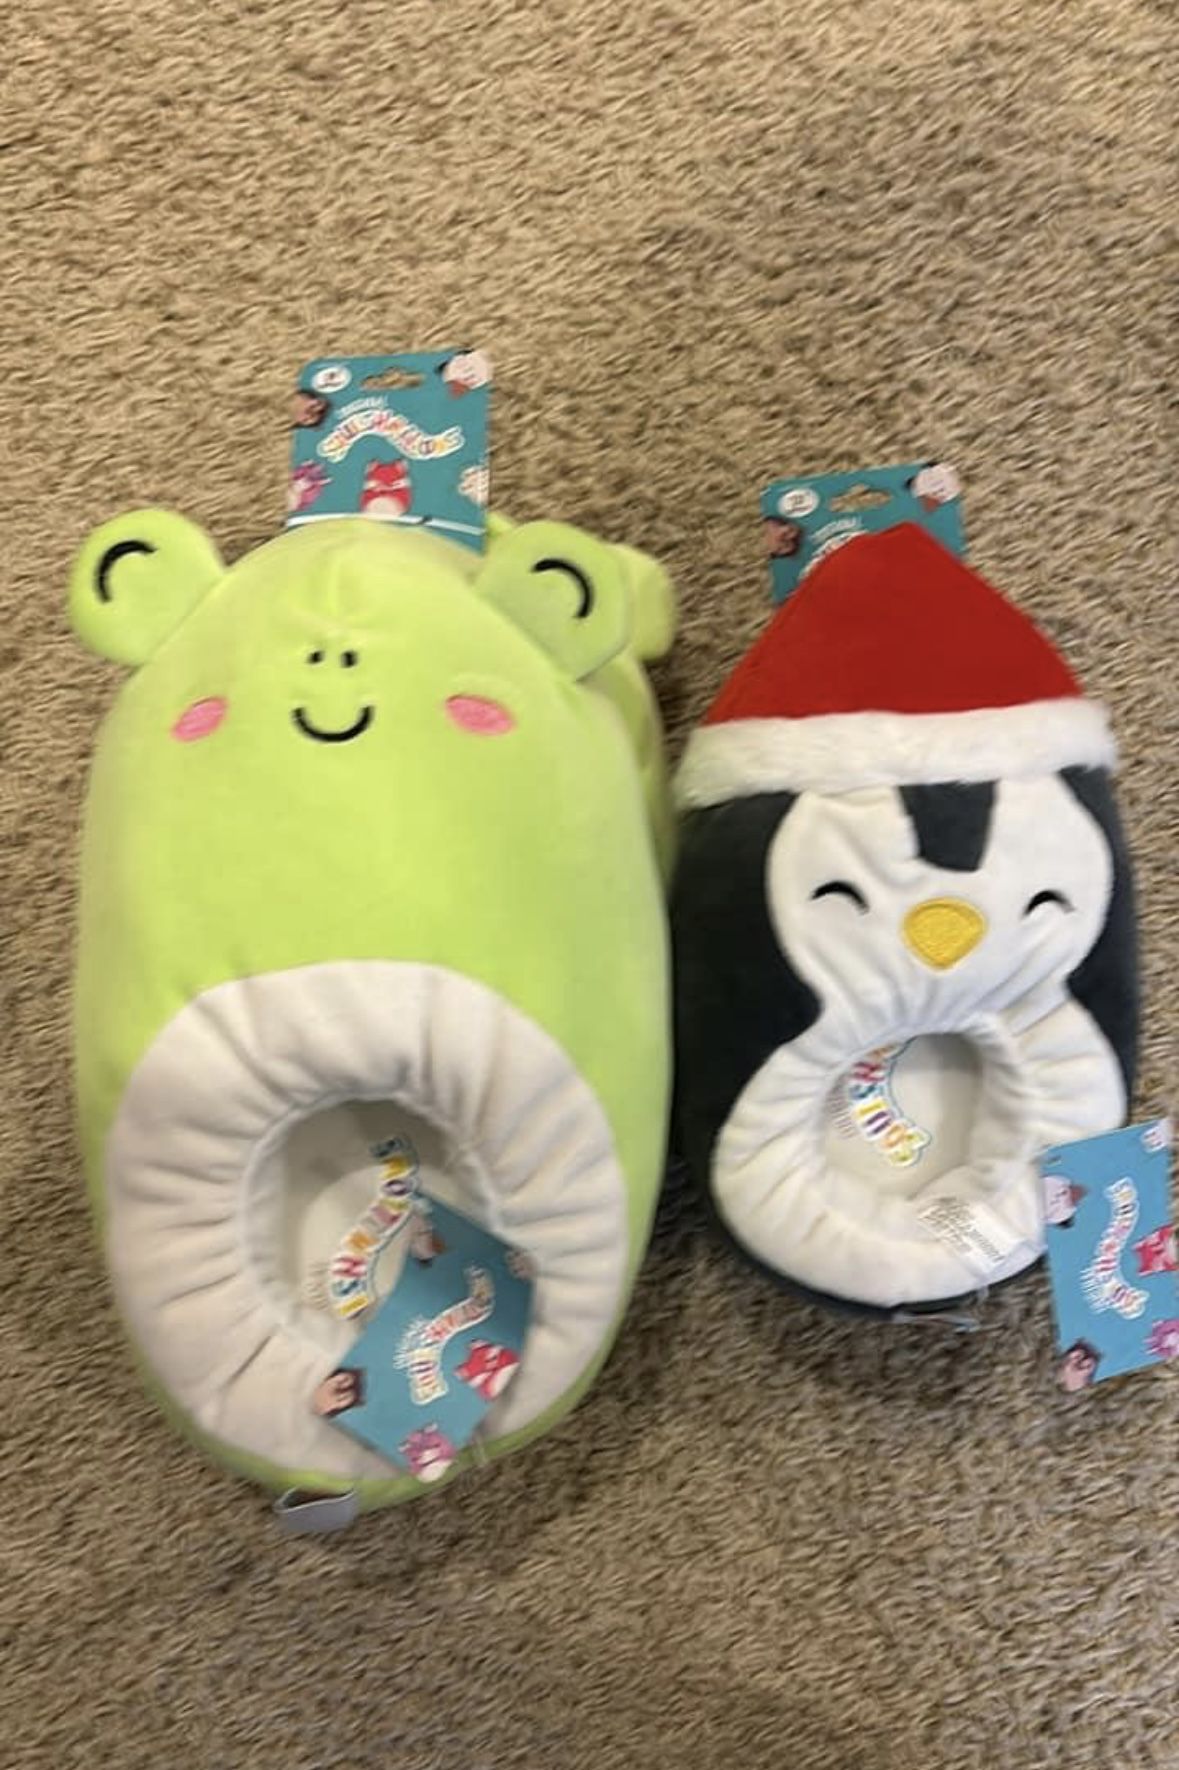 New Squishmallow Slippers